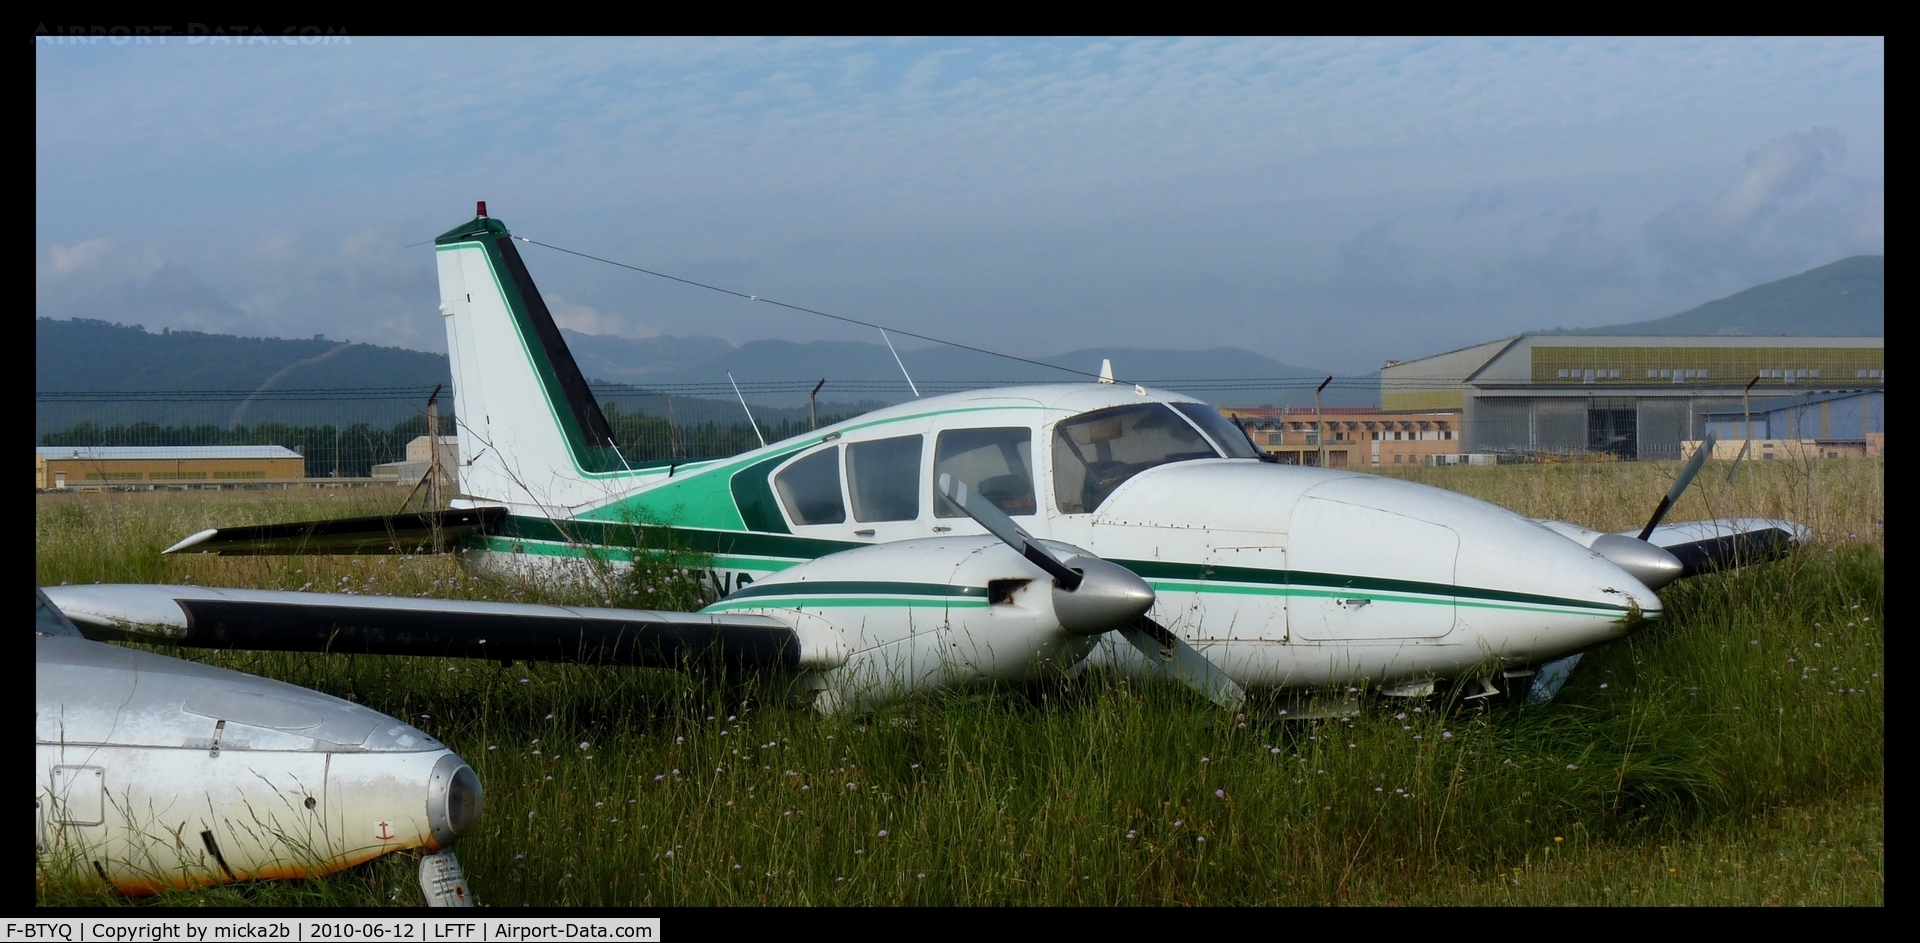 F-BTYQ, Piper PA-23-250 Aztec C/N 27-7304972, Stored.